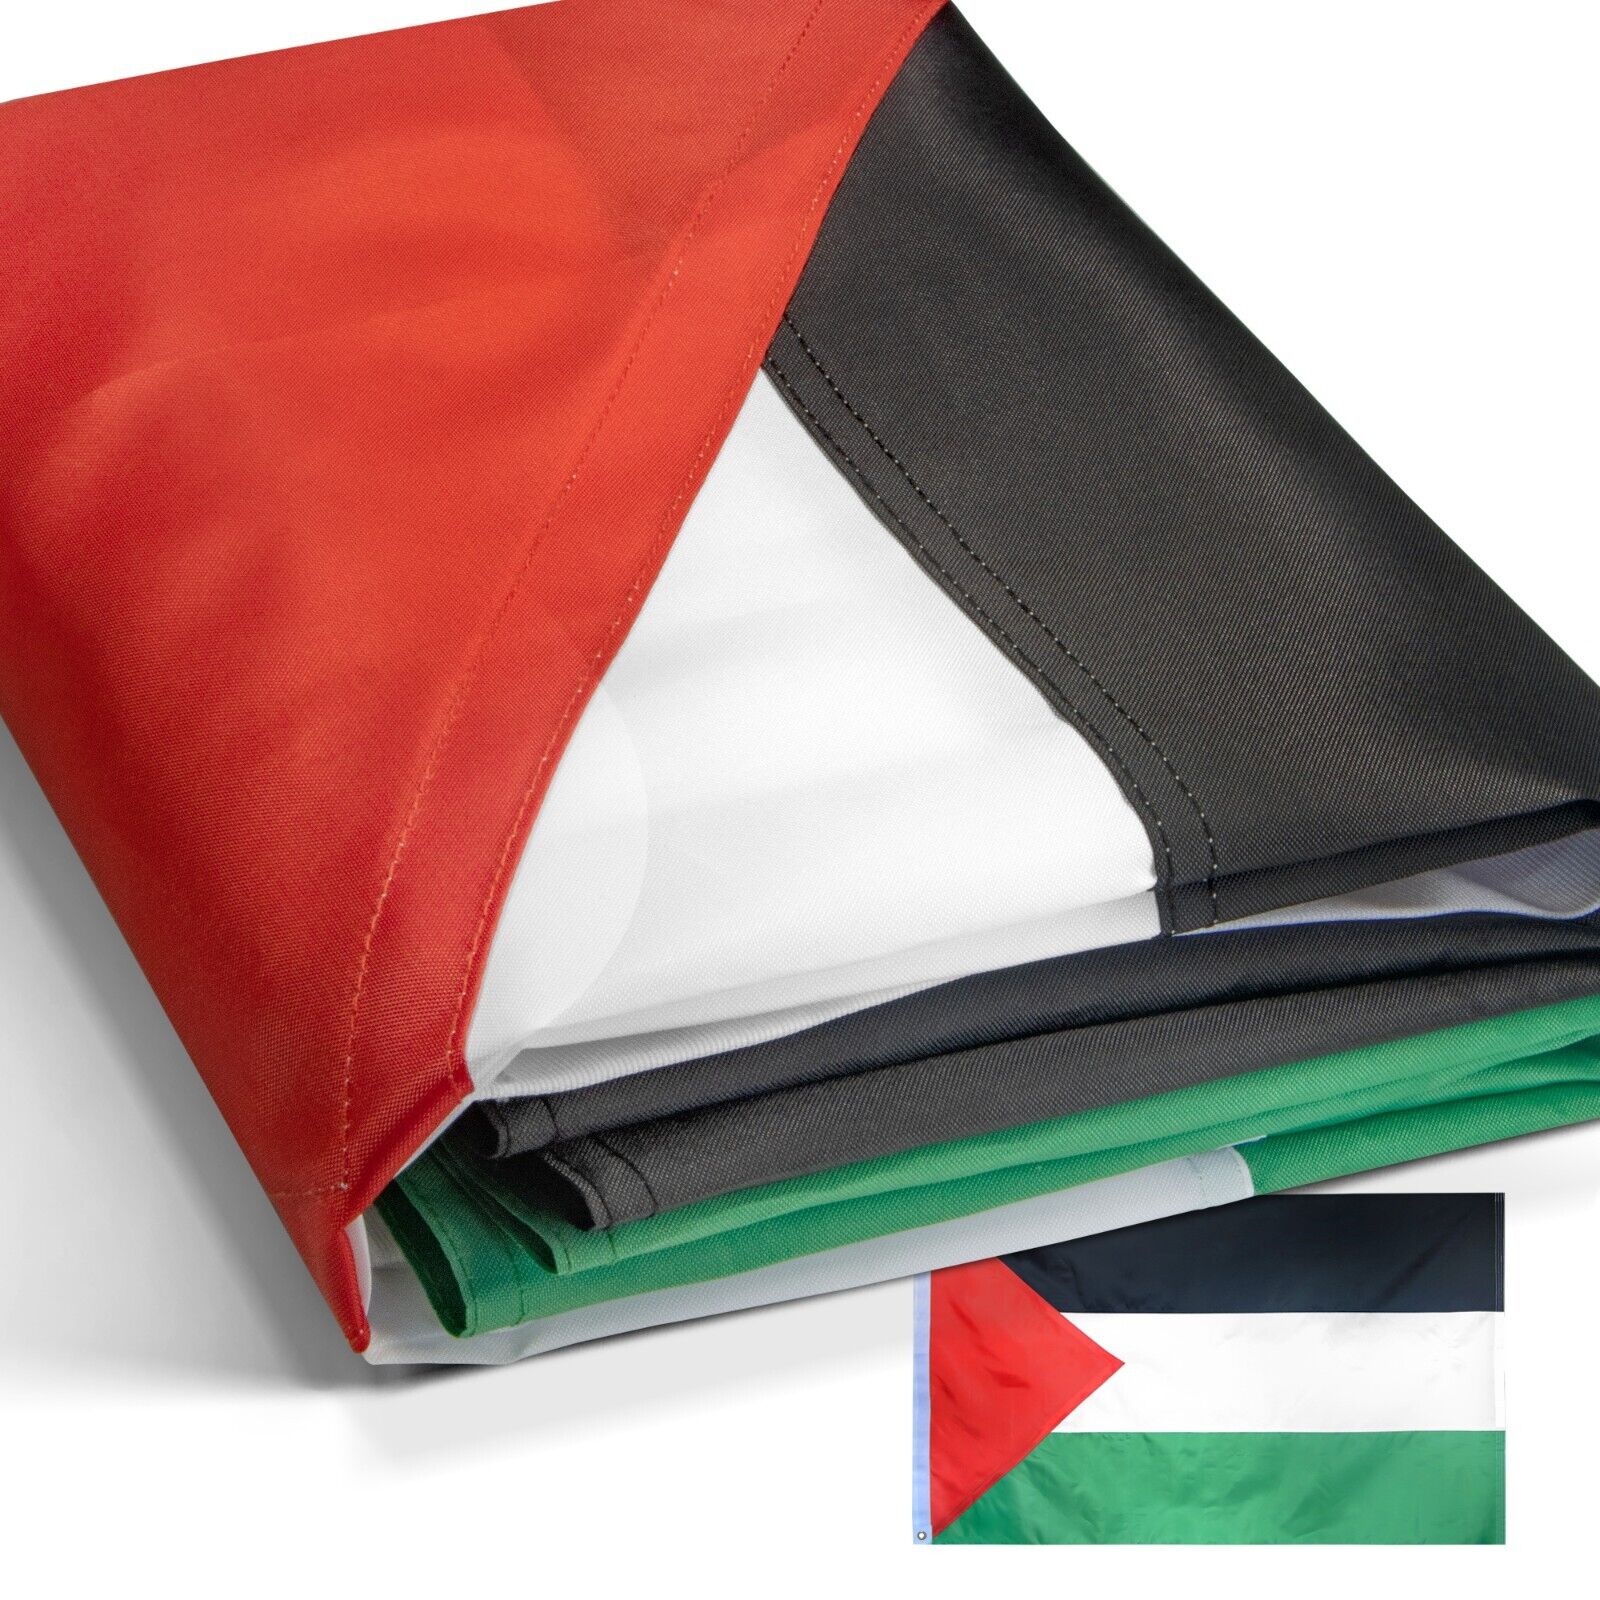 Anley EverStrong Palestine Flag 3x5 Foot Heavy Duty Nylon Embroidered Flags